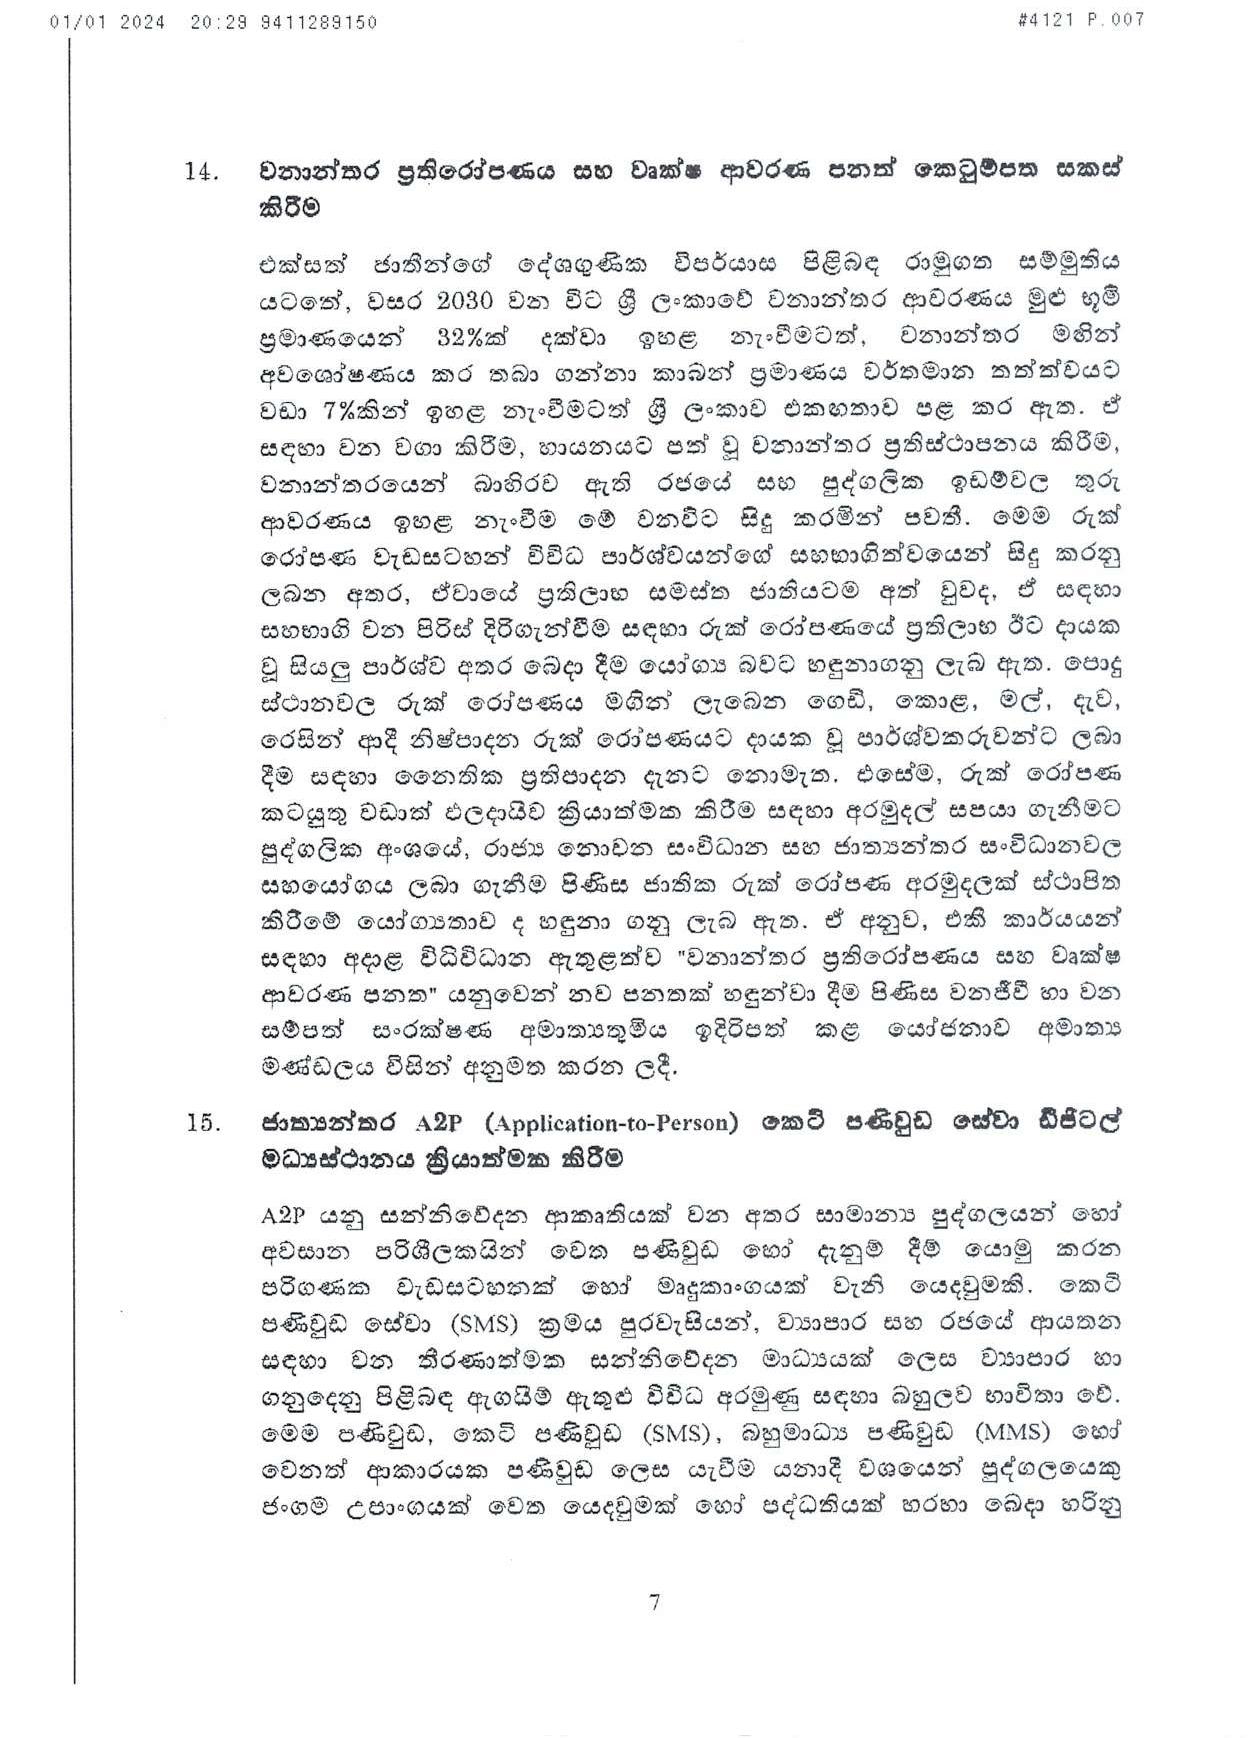 Cabinet Decision on 01.01.2024 page 007